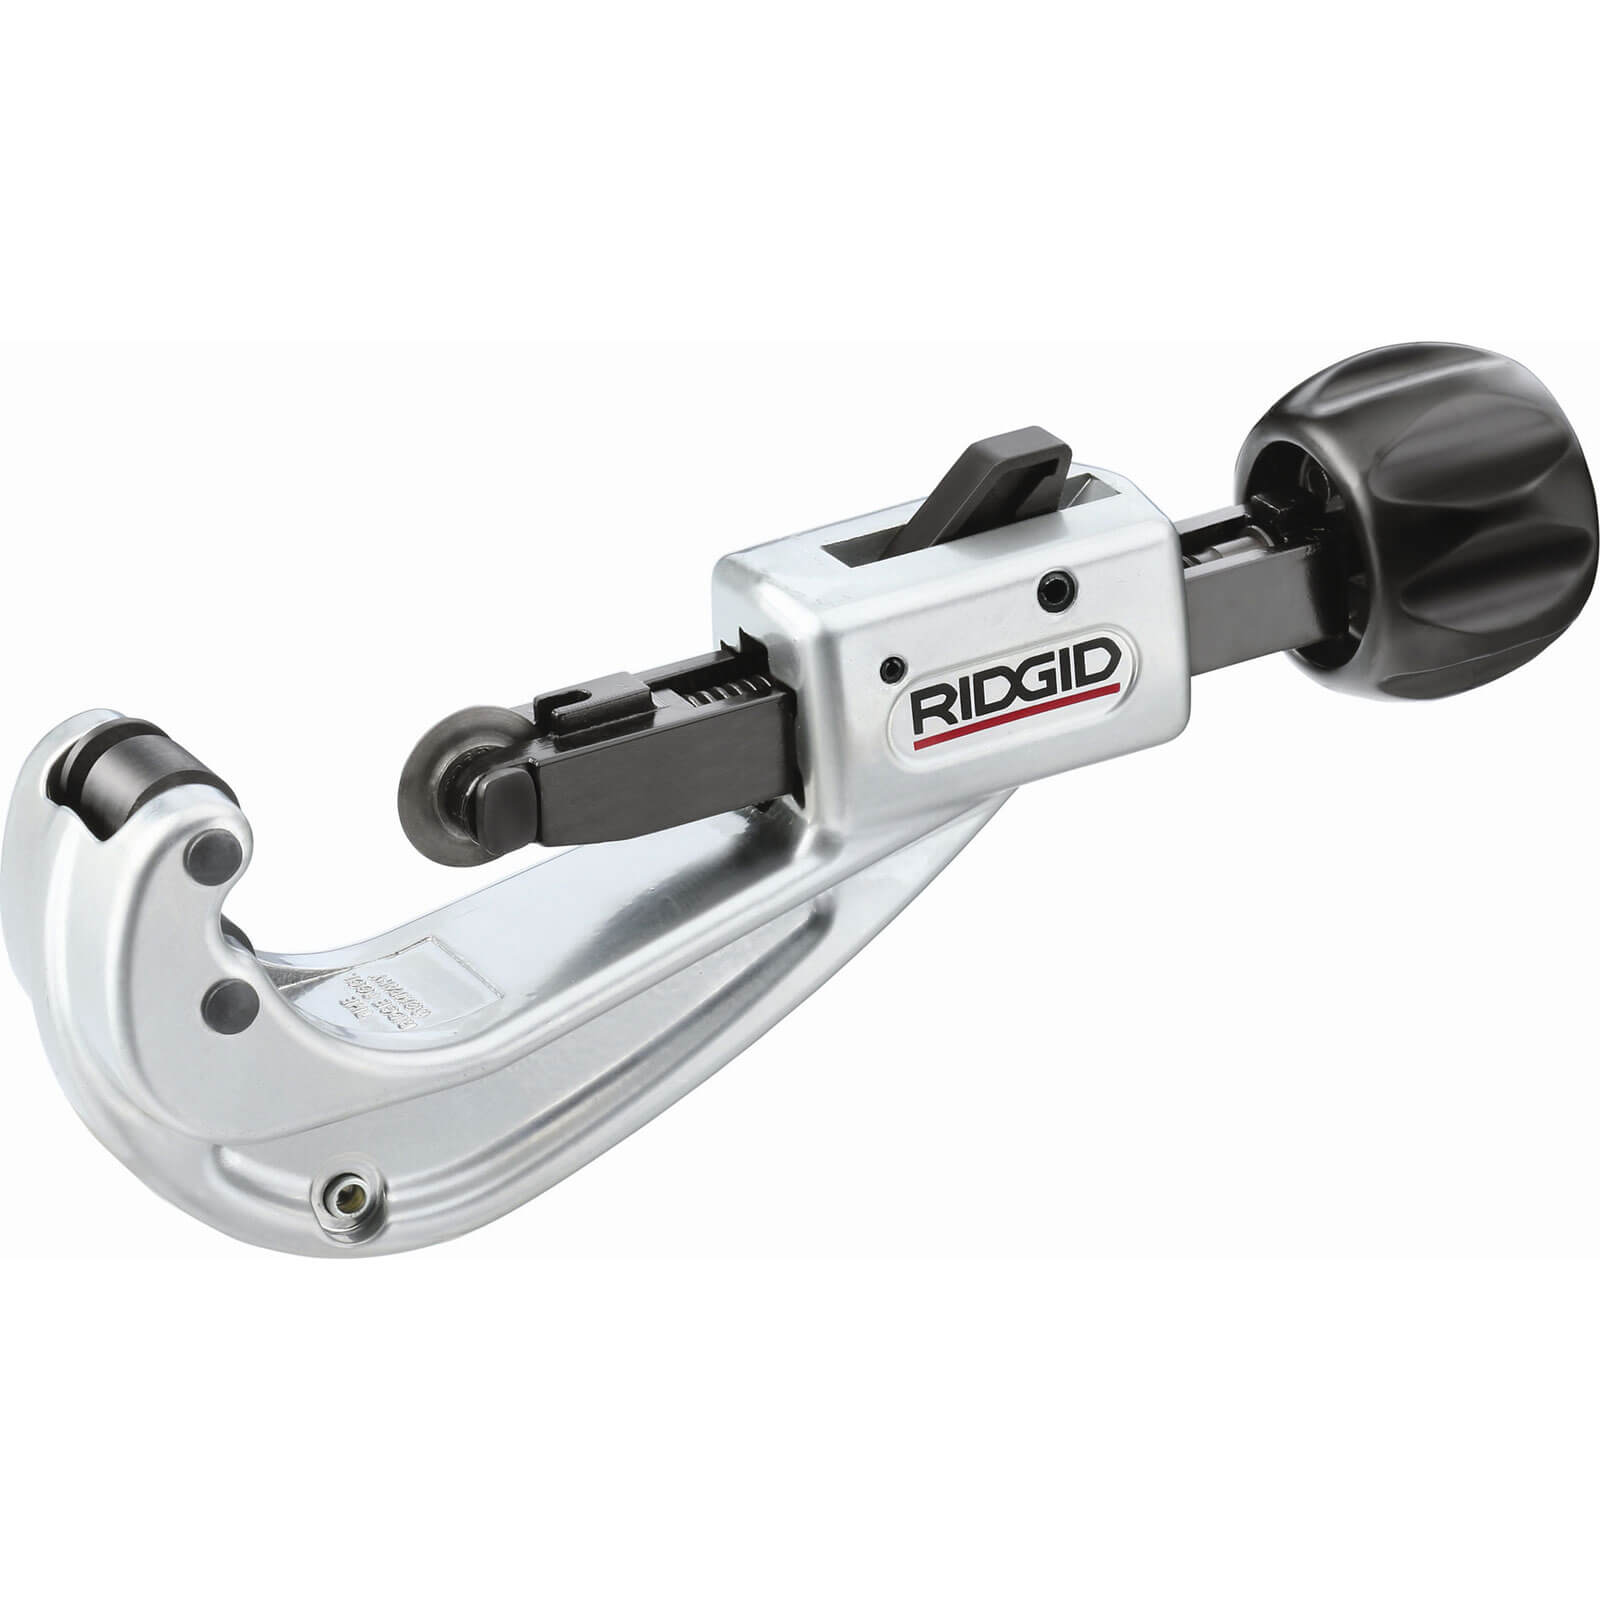 Photo of Ridgid Quick Acting Platic Pipe Cutter 10mm - 50mm